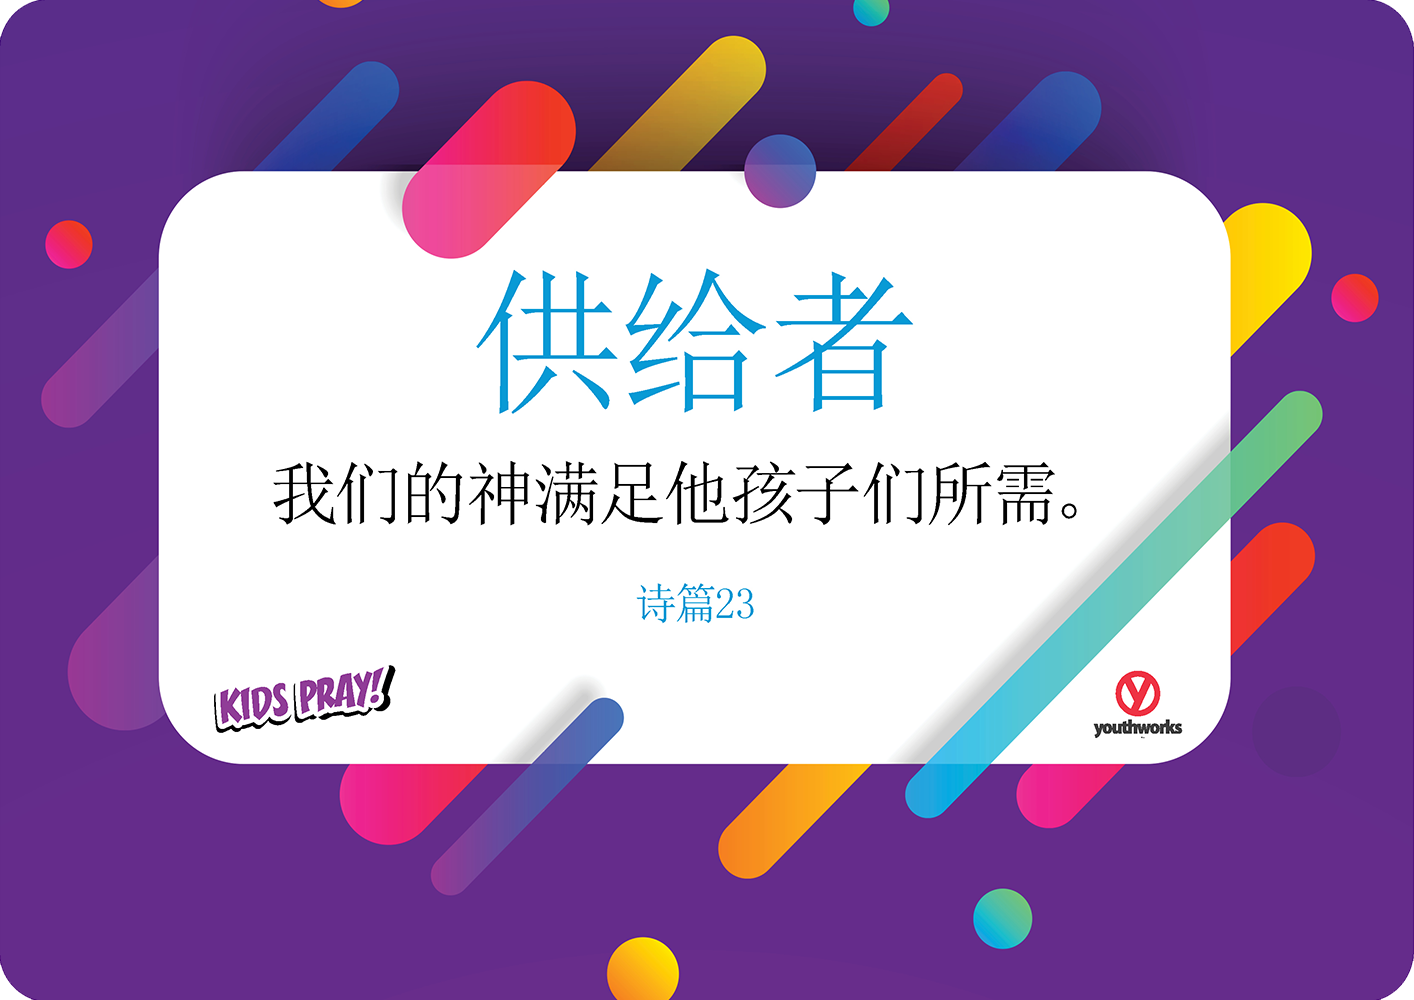 Youthworks_Kids-Pray-POSTERS-CHINESE-PROVIDER.png